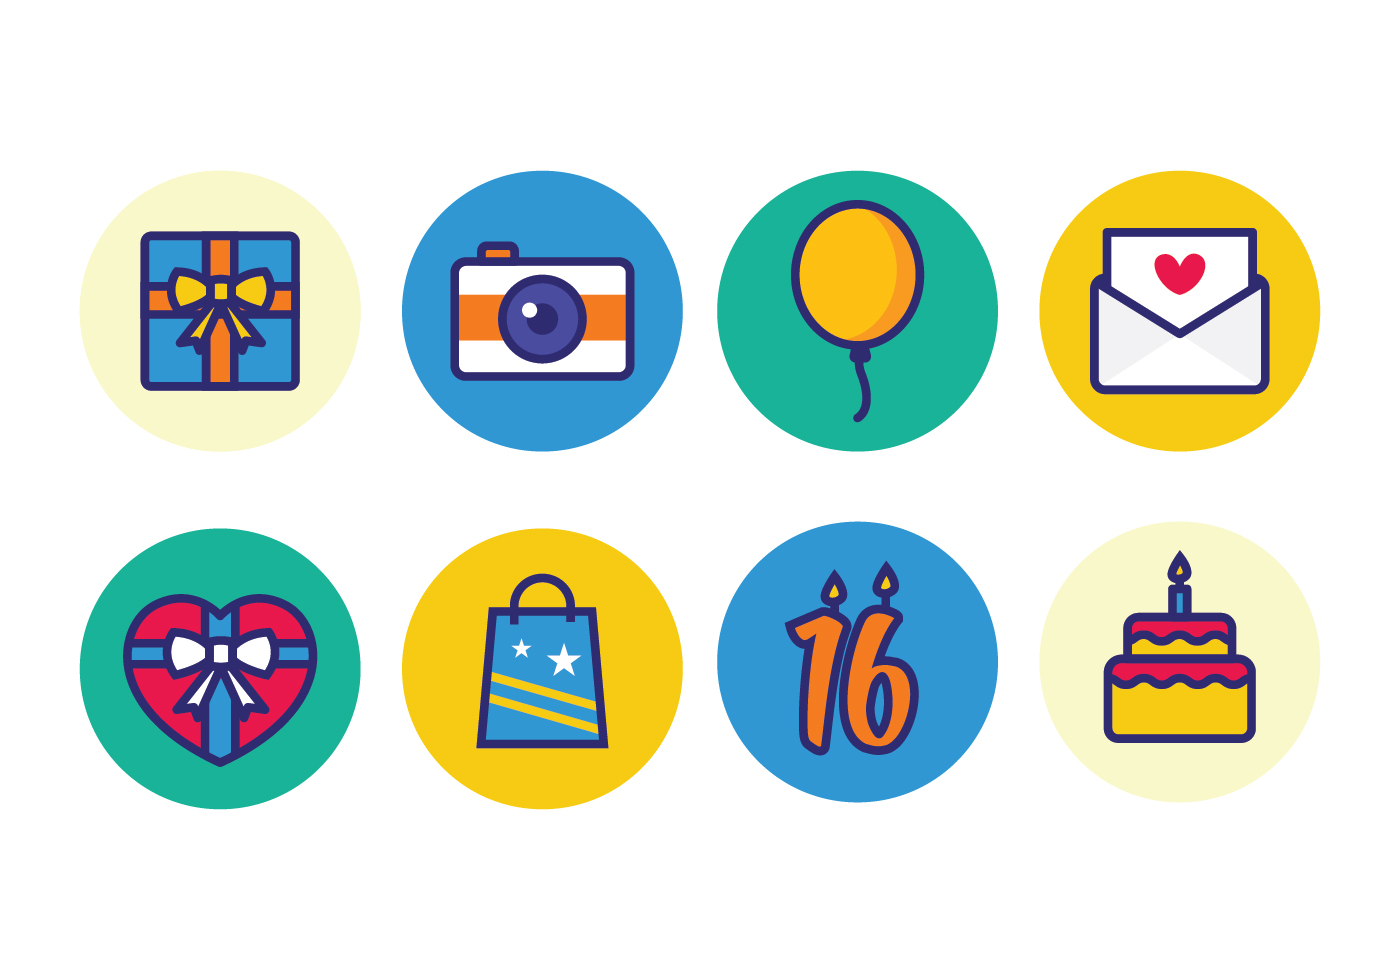 Download Free Birthday Icons - Download Free Vectors, Clipart ...